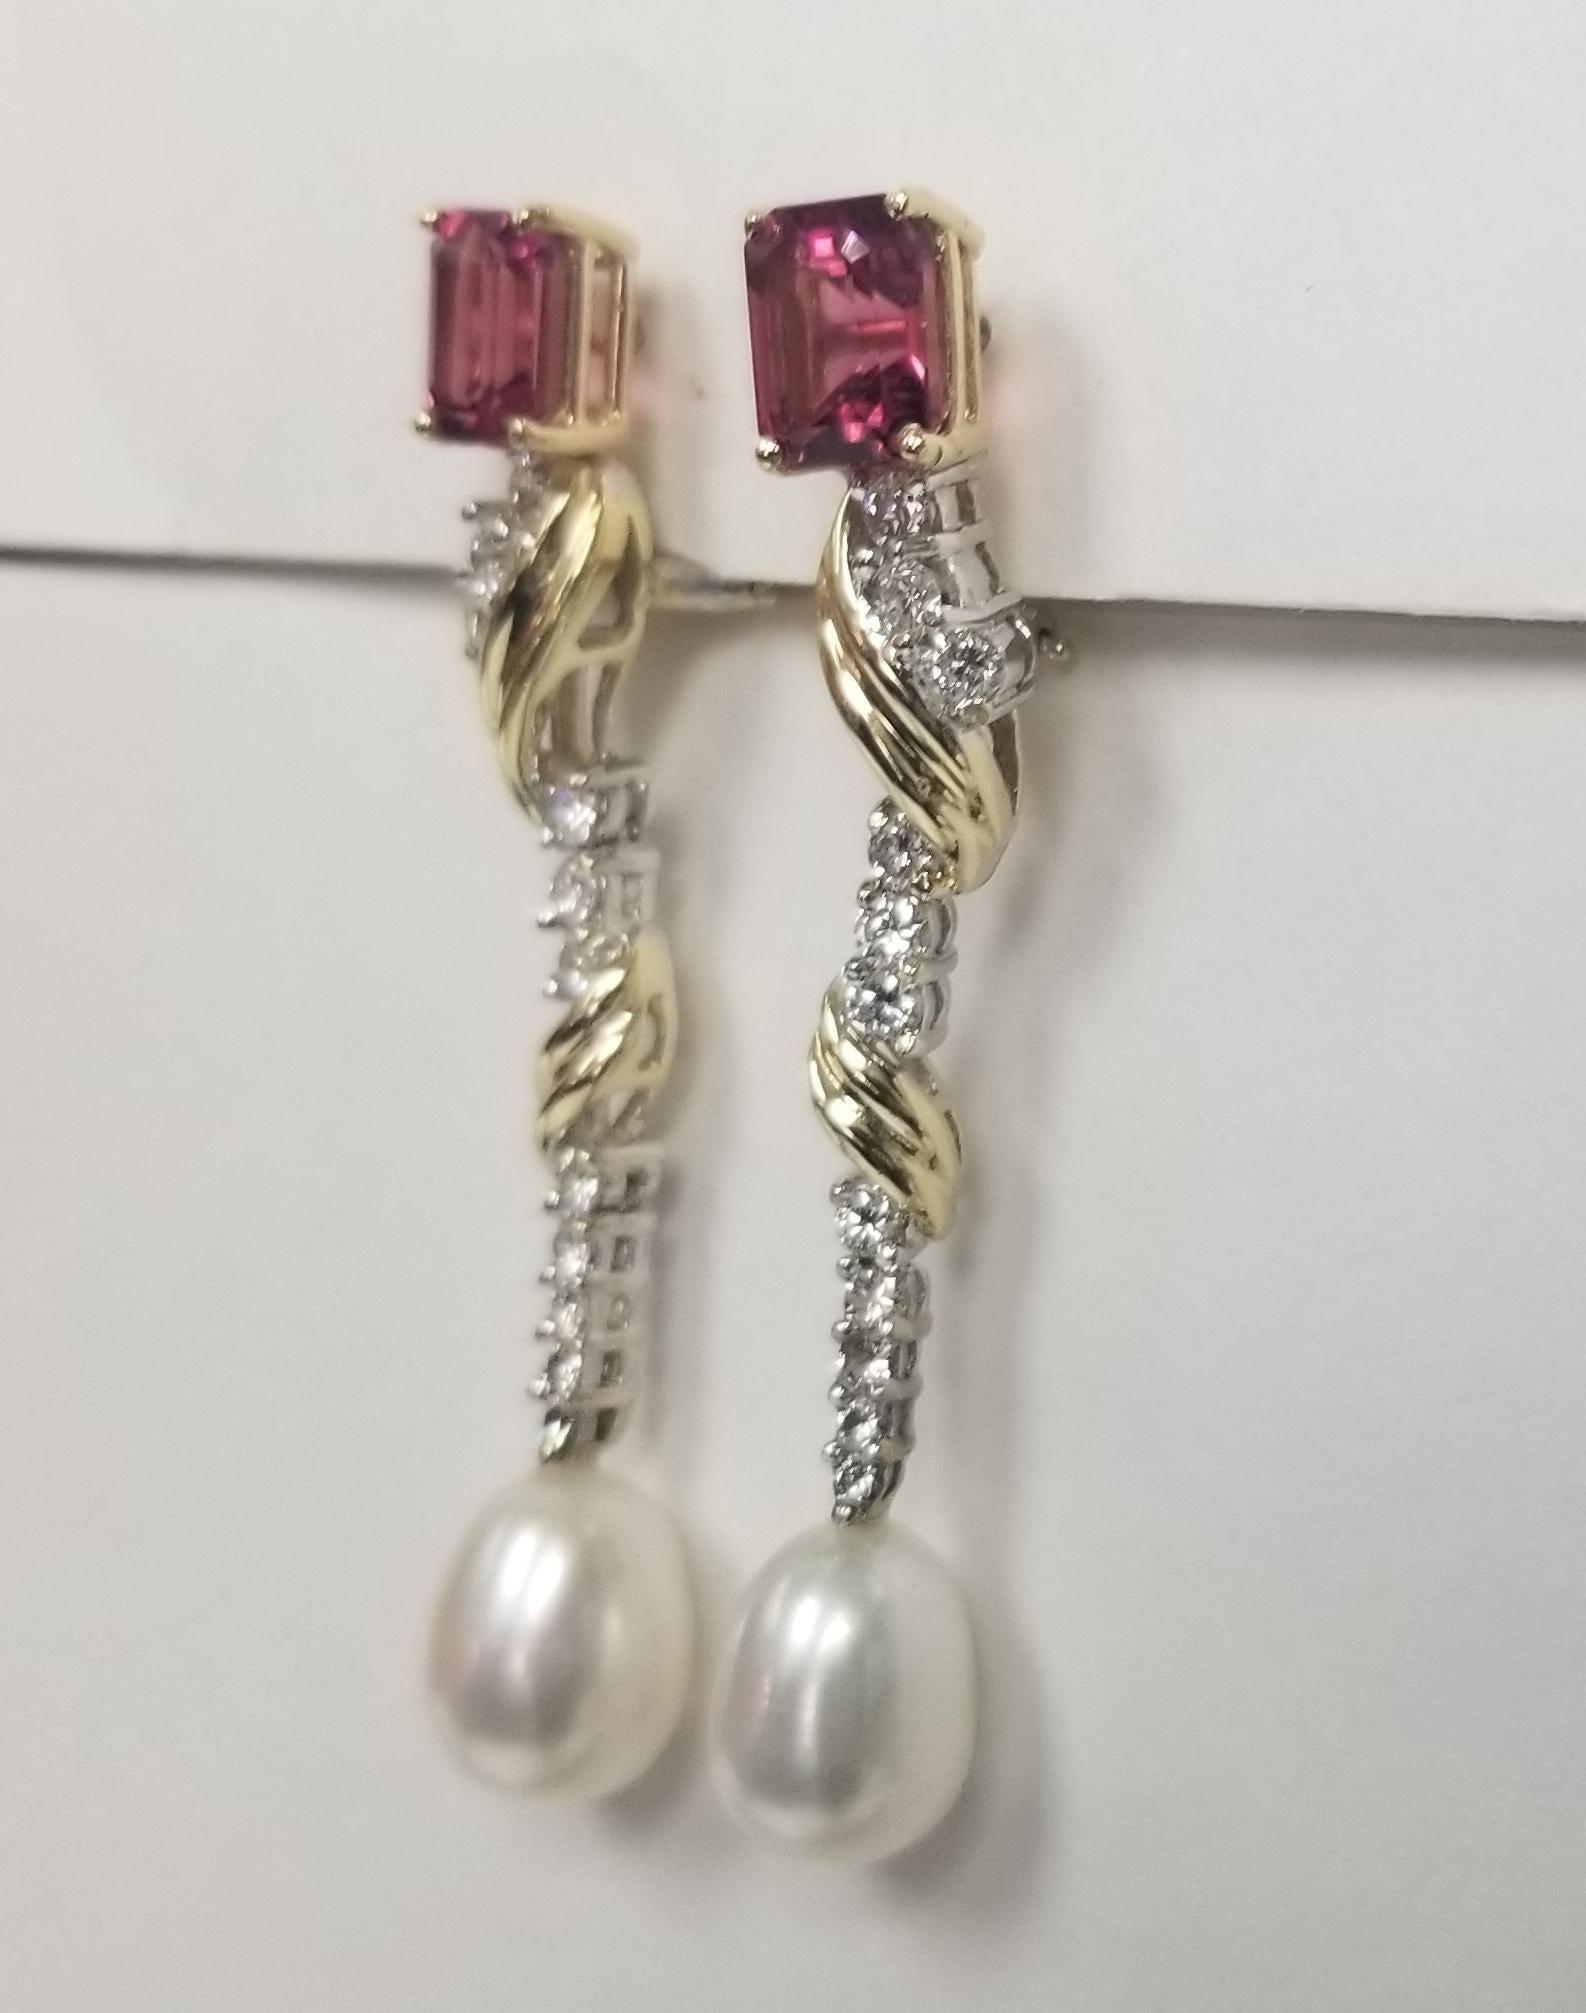  Specifications:
    main stone: 2 Pink Tourmaline weighing 3.61cts.
    DIAMONDS: 22 Diamonds 1.10cts.
    color: G
    clarity: VS
    brand: NONE
    metal: 14K yellow gold
    type: DROP EARringS
    weight:  11 GrS
    LENGTH: 2 INCH